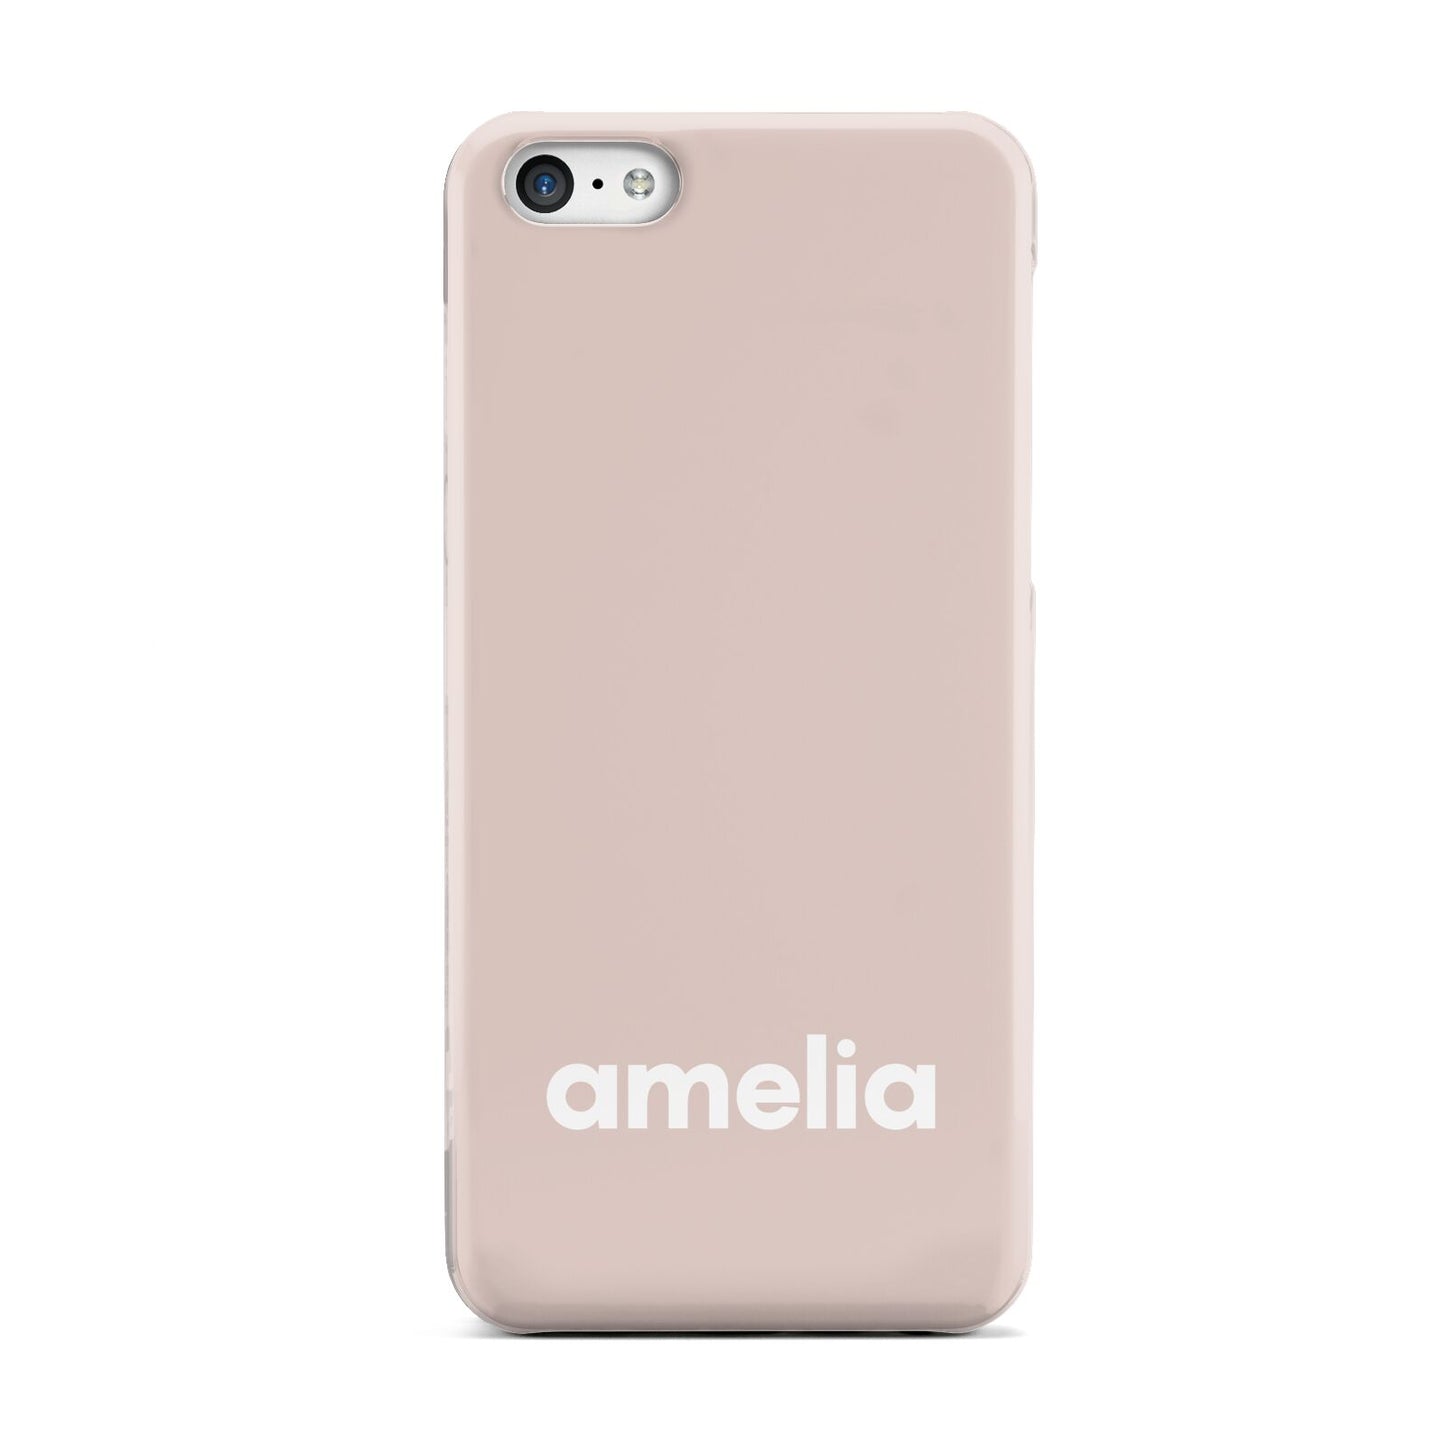 Simple Blush Pink with Name Apple iPhone 5c Case